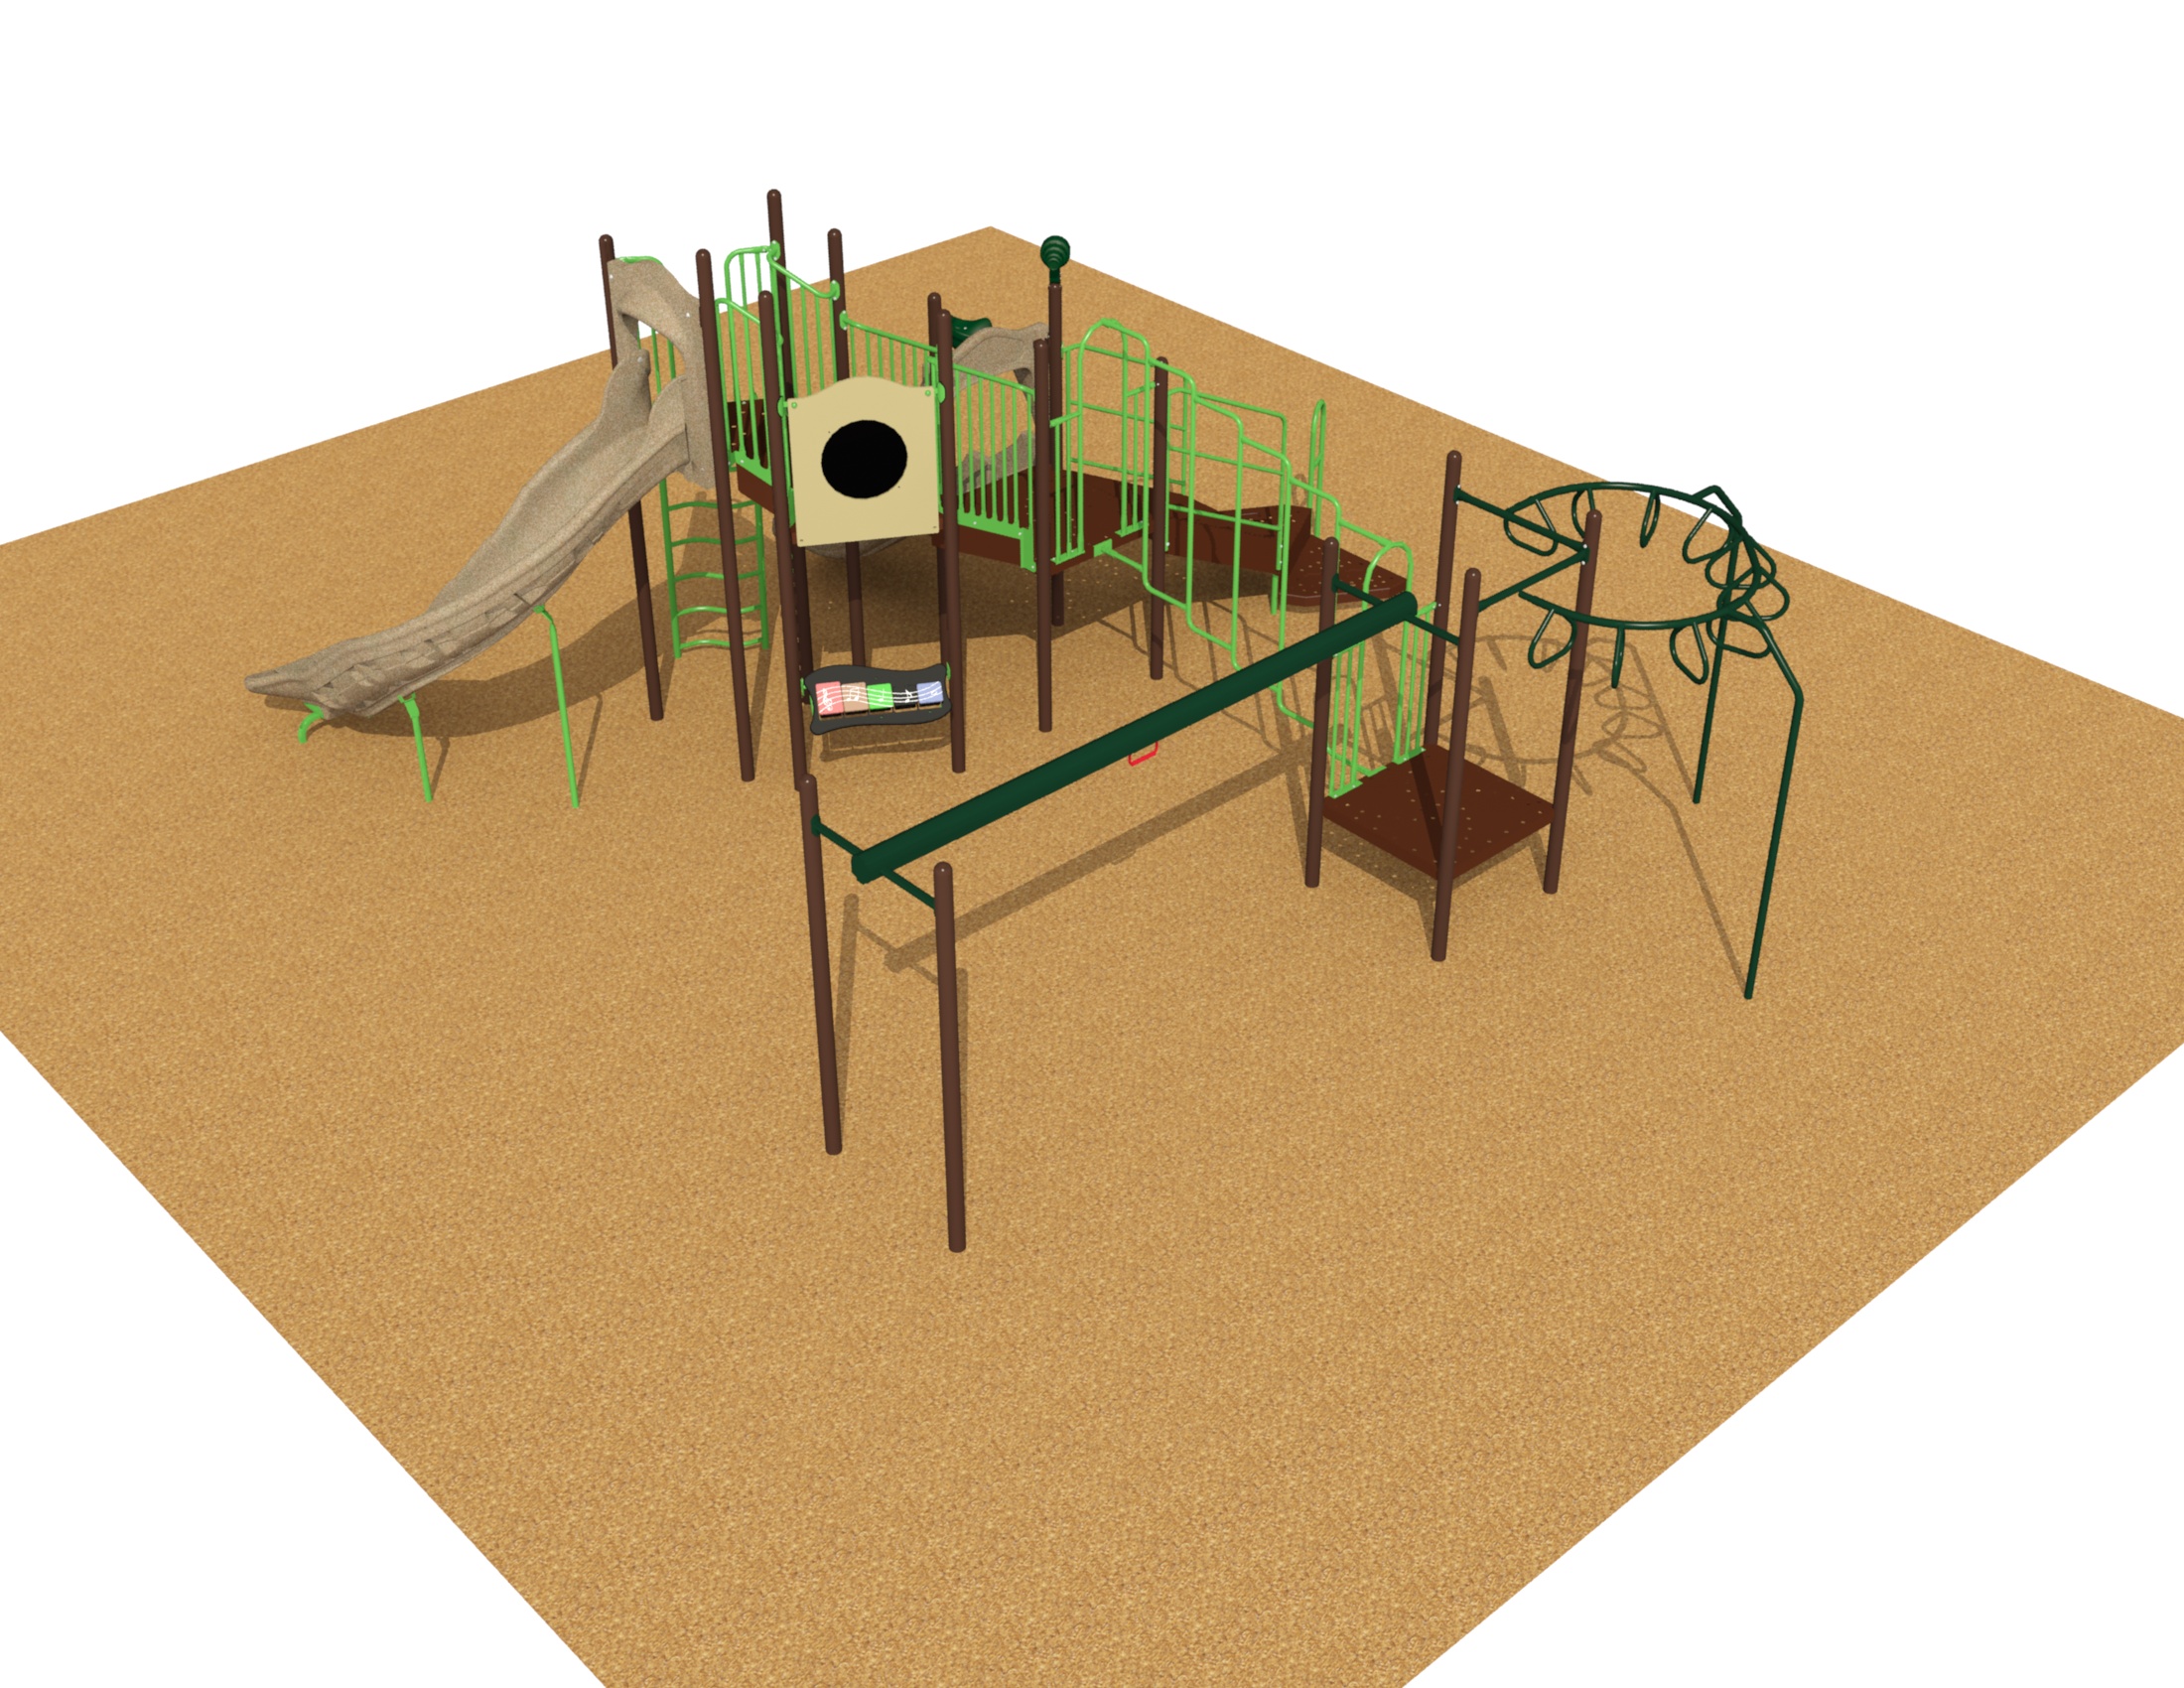 Lloyd Hawn Play Structure Rendering